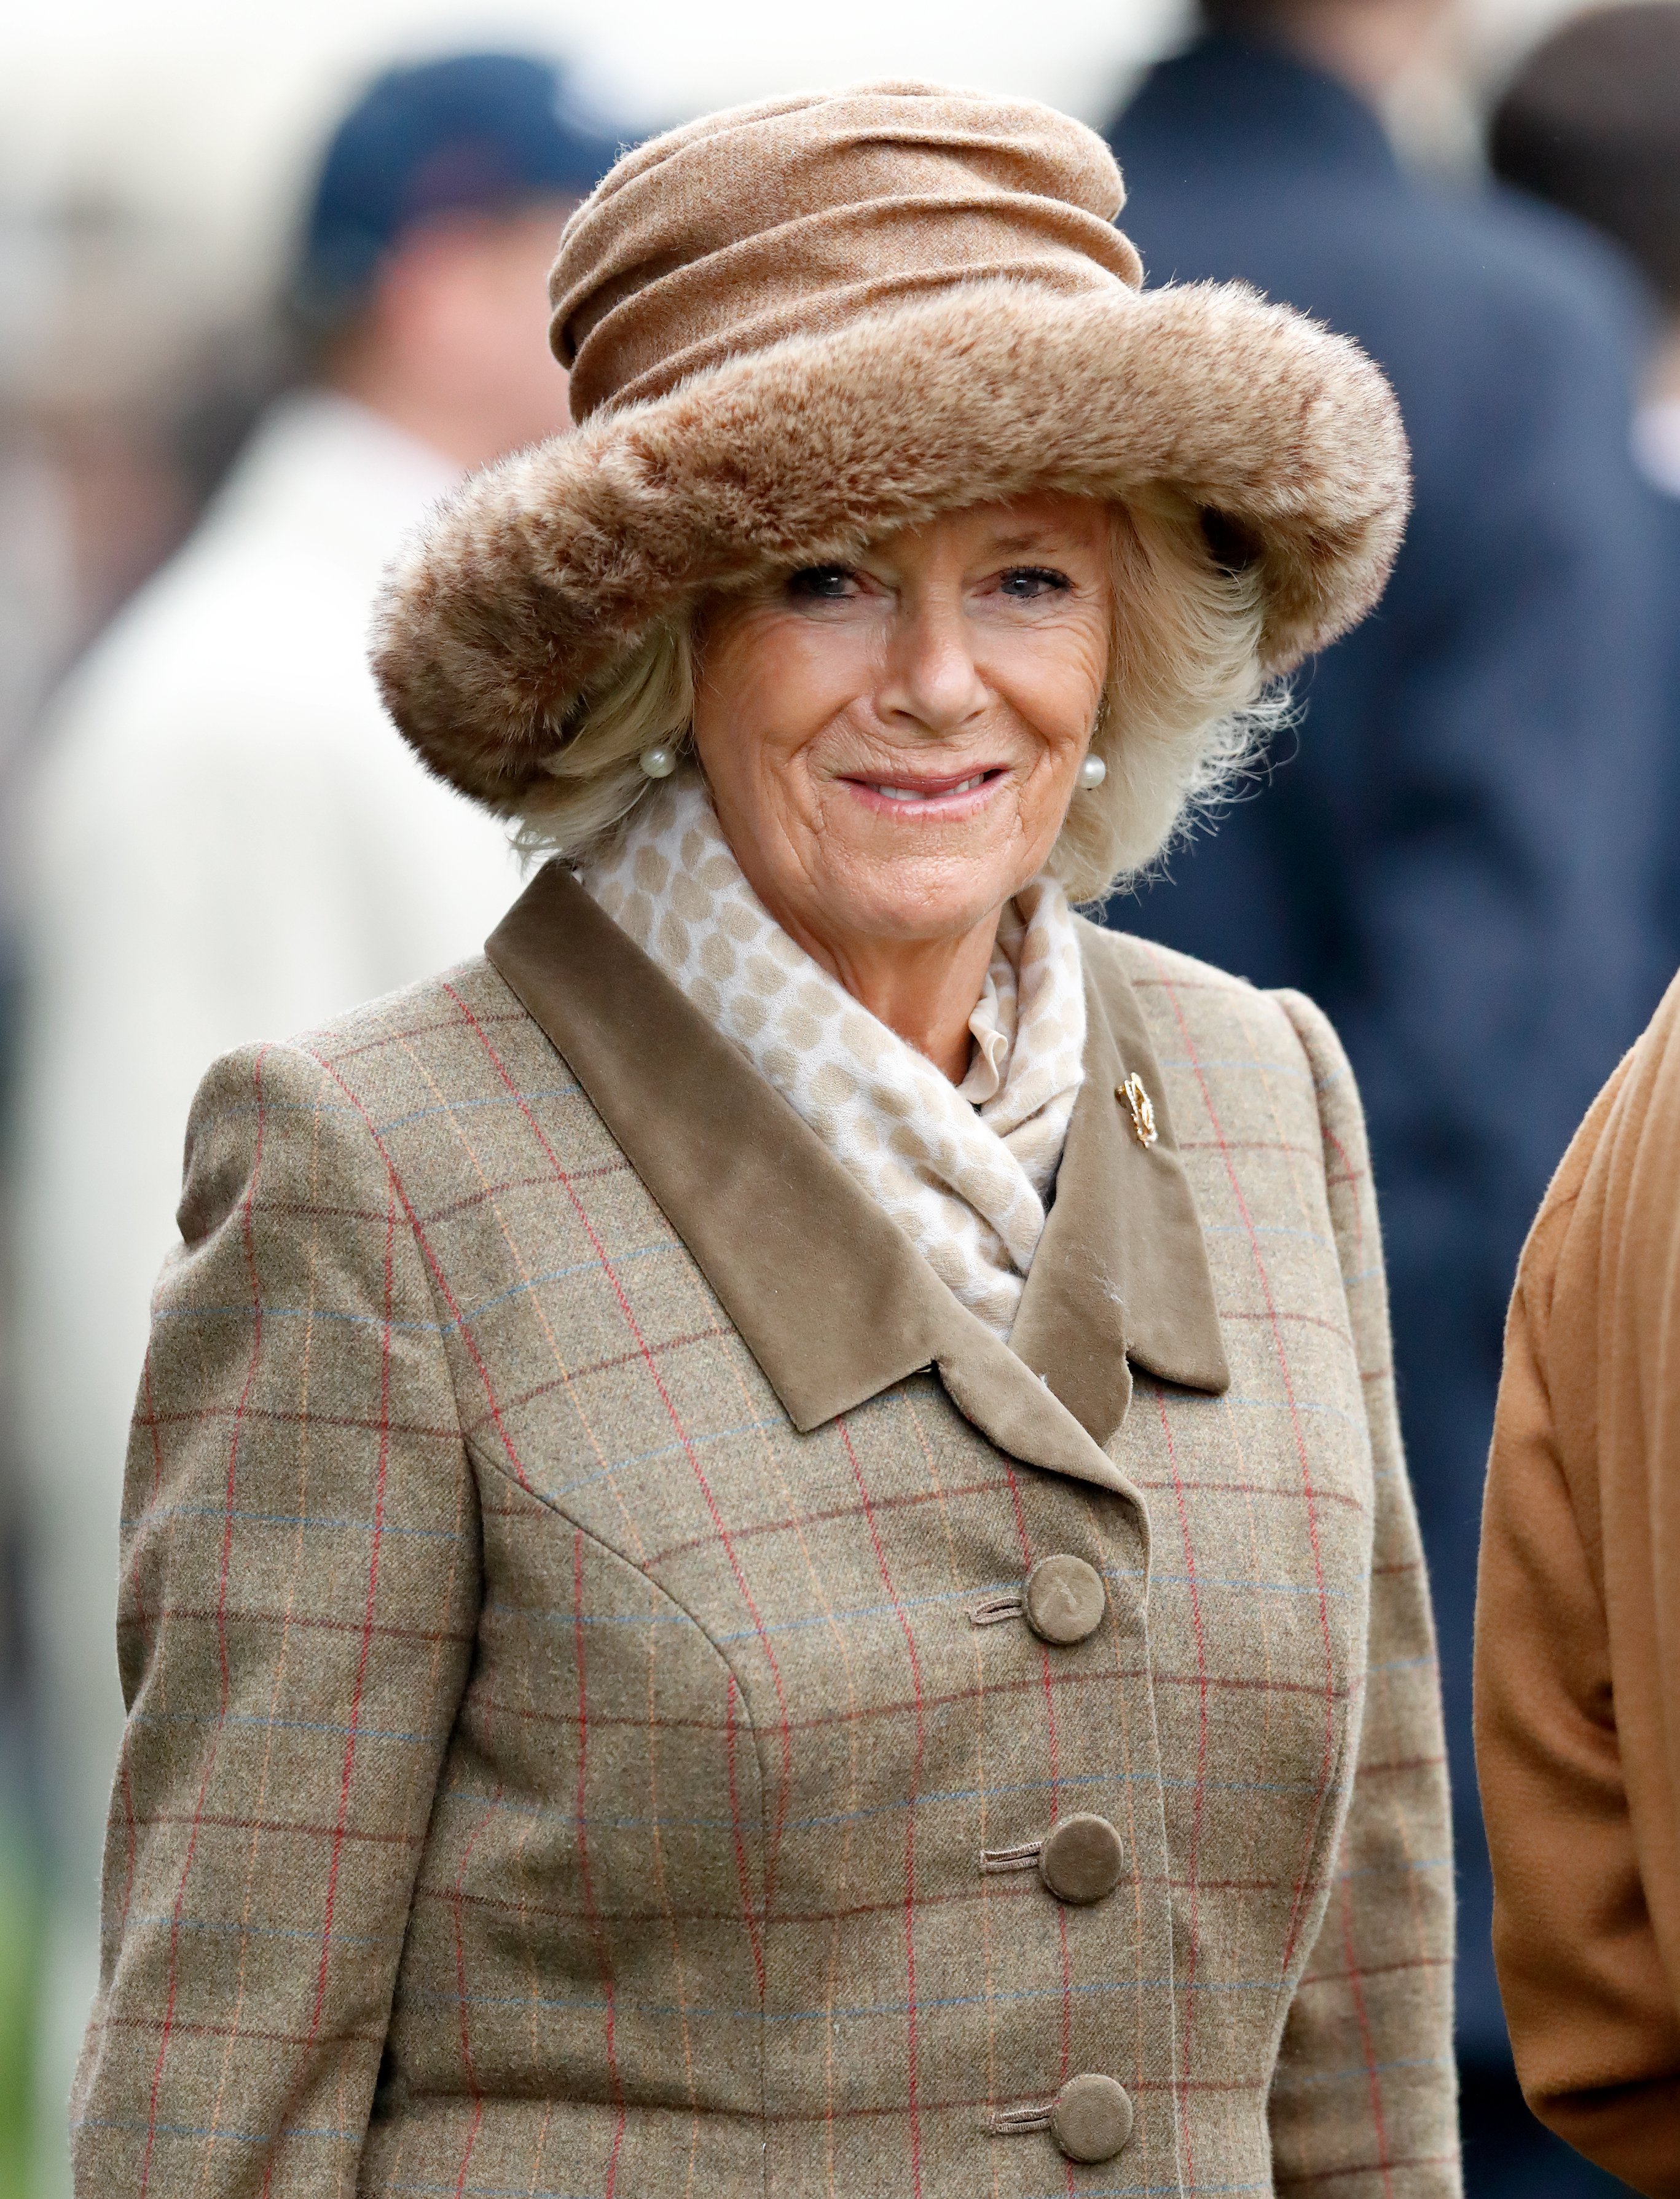 Camilla, Duchess of Cornwall, attends The Prince's Countryside Fund Race day at Ascot Racecourse on November 23, 2018, in Ascot, England | Source: Getty Images